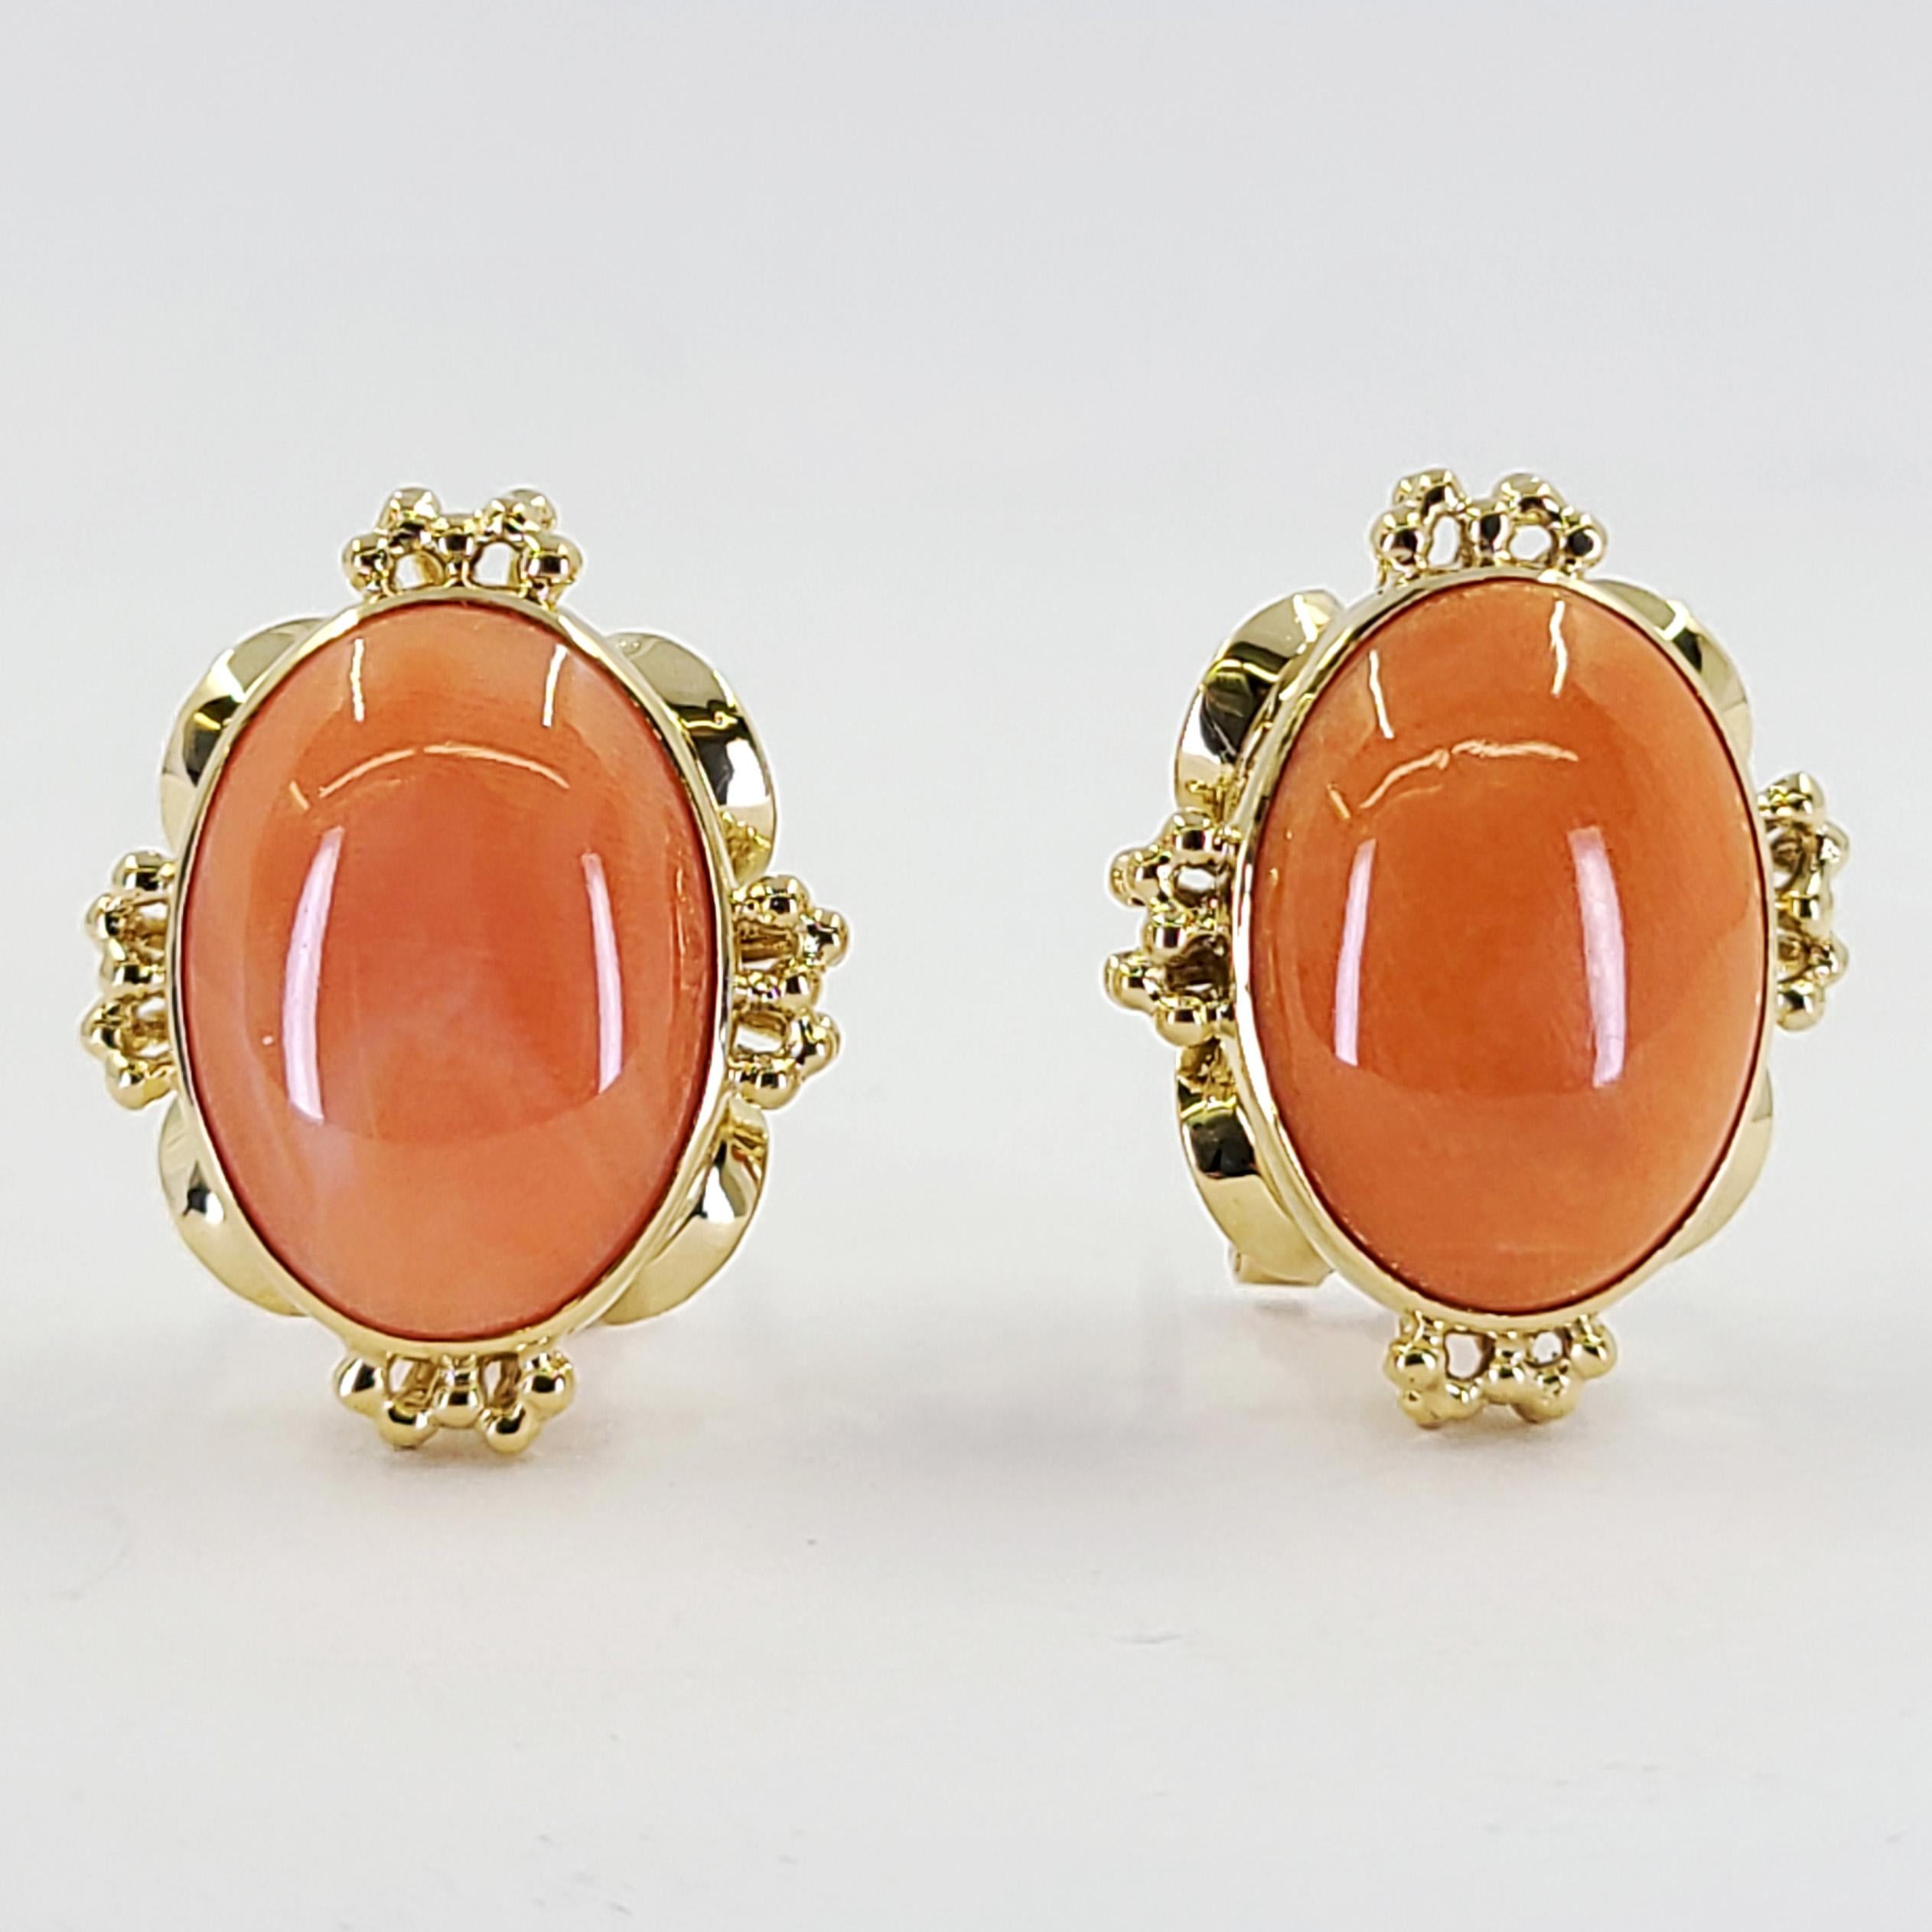 18 Karat Yellow Gold Earrings Featuring 2 Bezel Set 17mm x 13mm Oval Corals. Pierced Post With Omega Clip Back. Finished Weight Is 12.5 Grams.